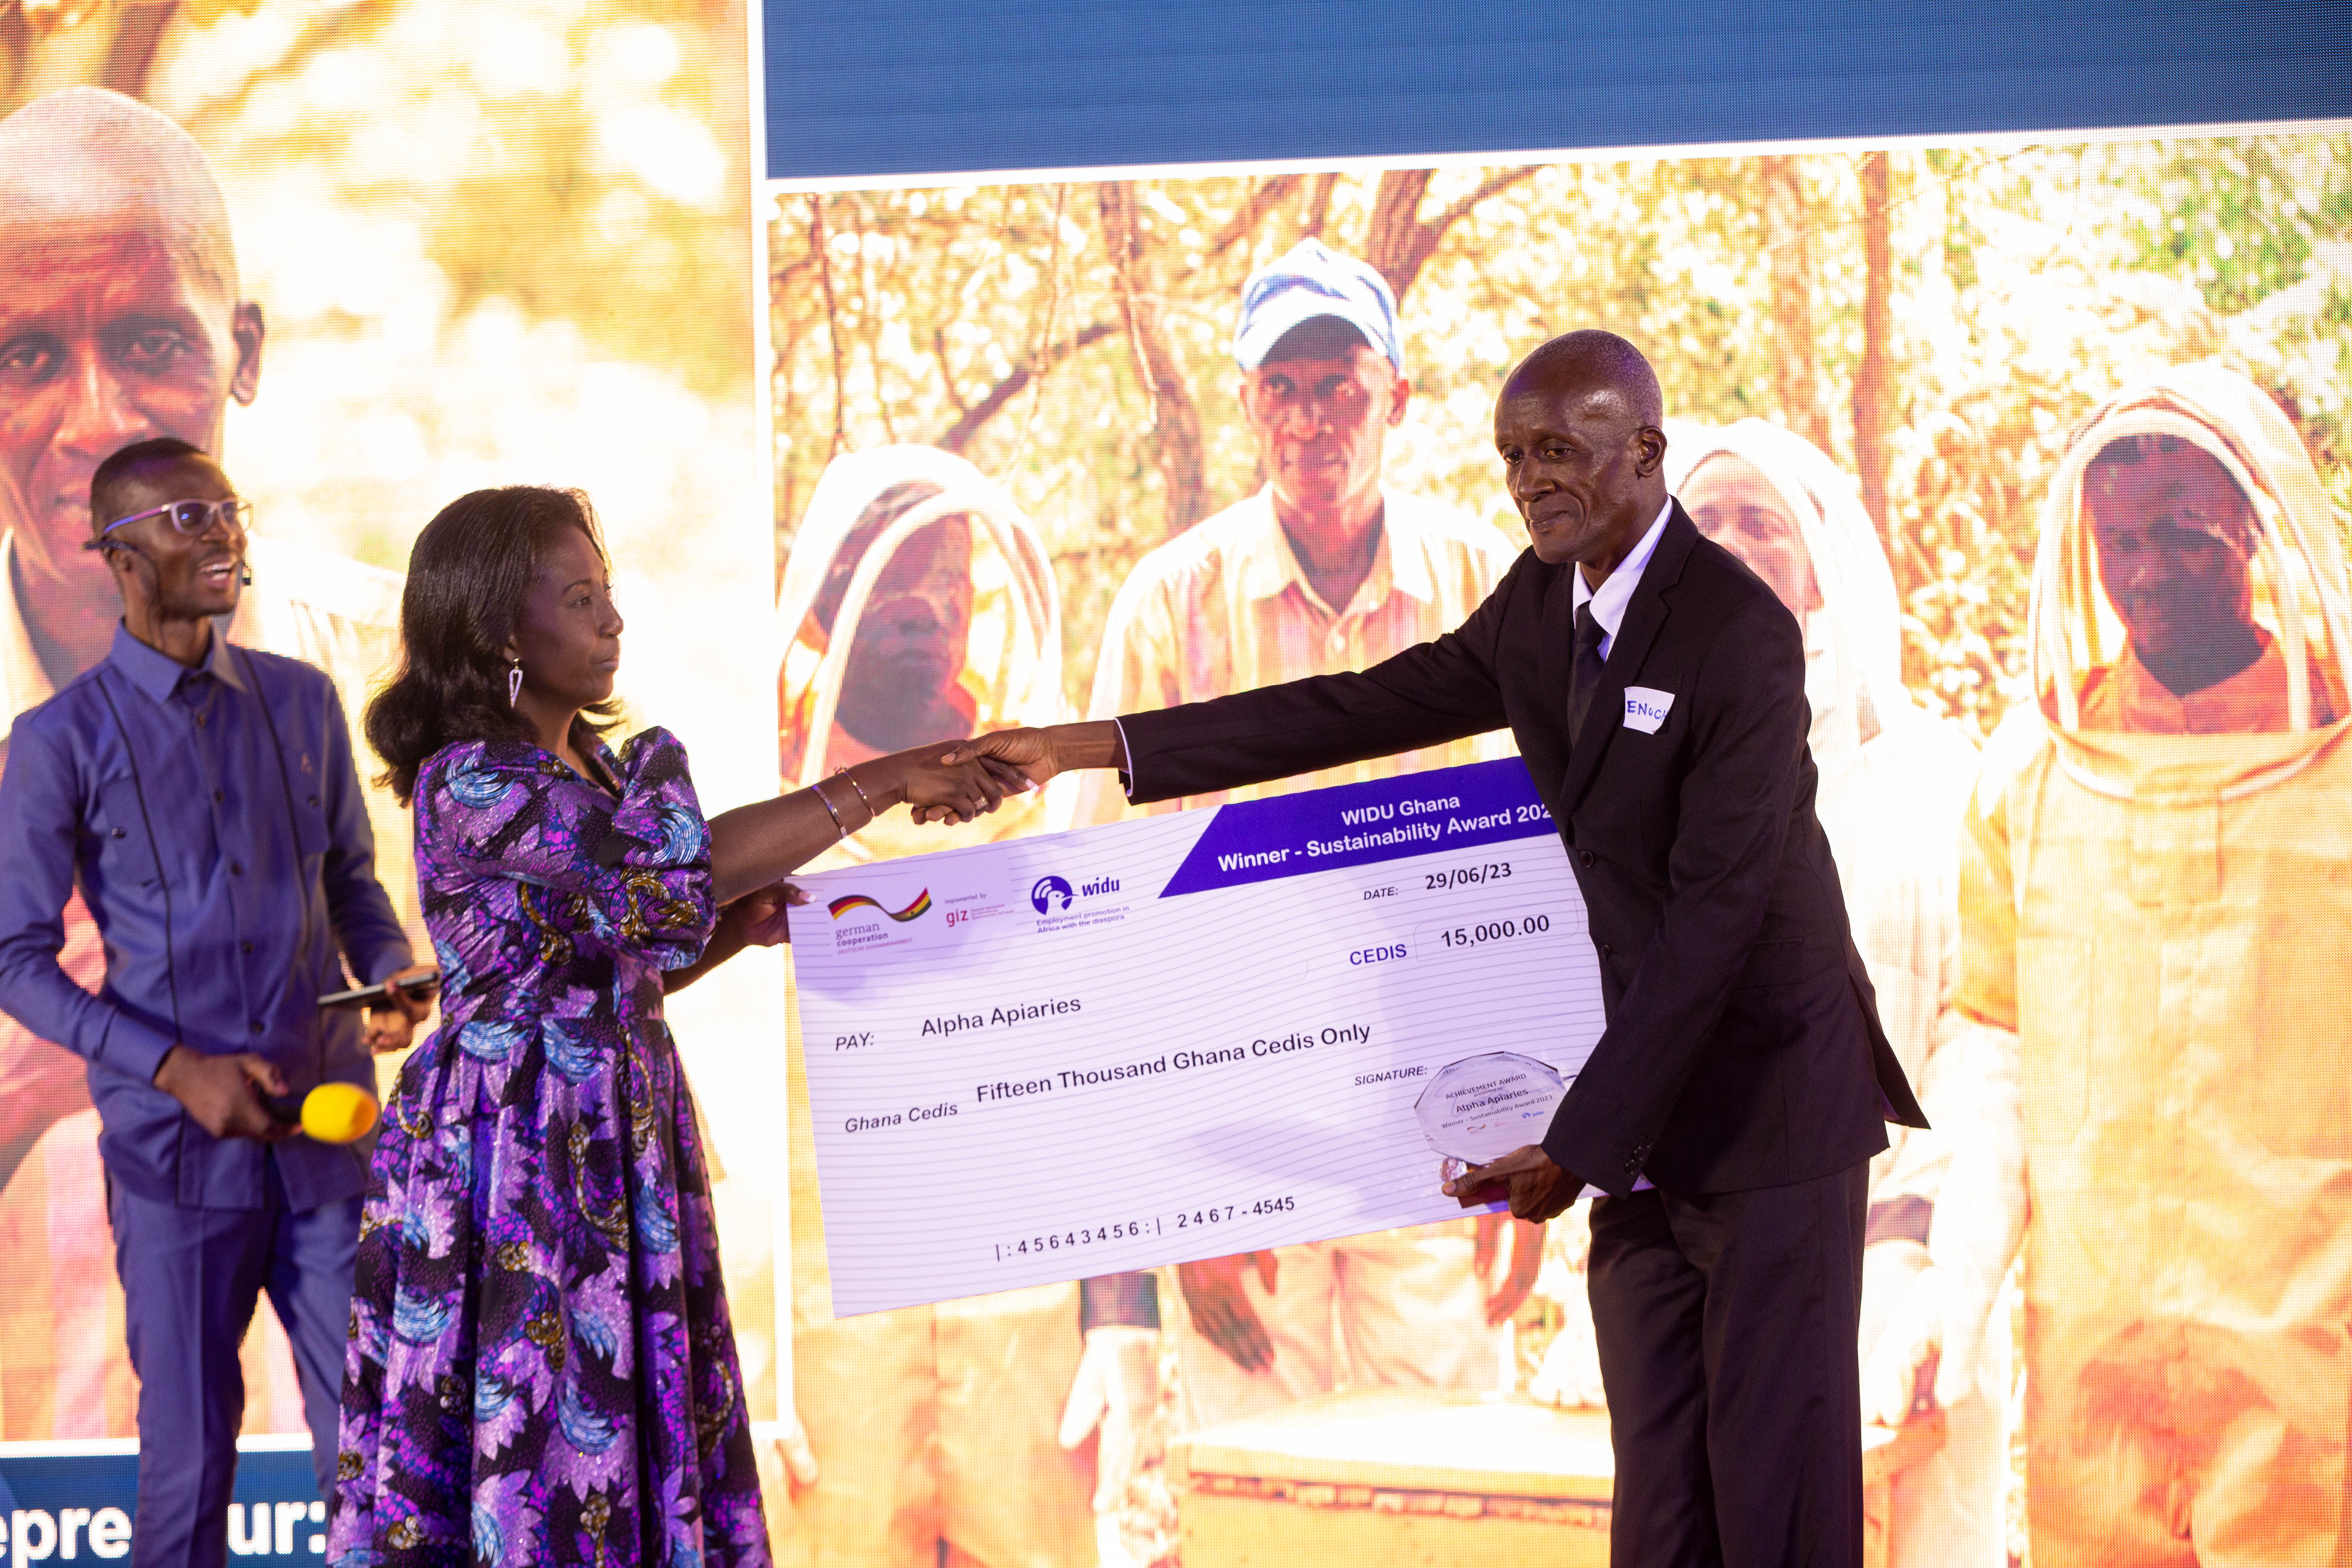 Enoch Dzadzra receives the Sustainability Award 2023 for his business Alpha Apiaries at WIDU Ghana Award 2023 ceremony